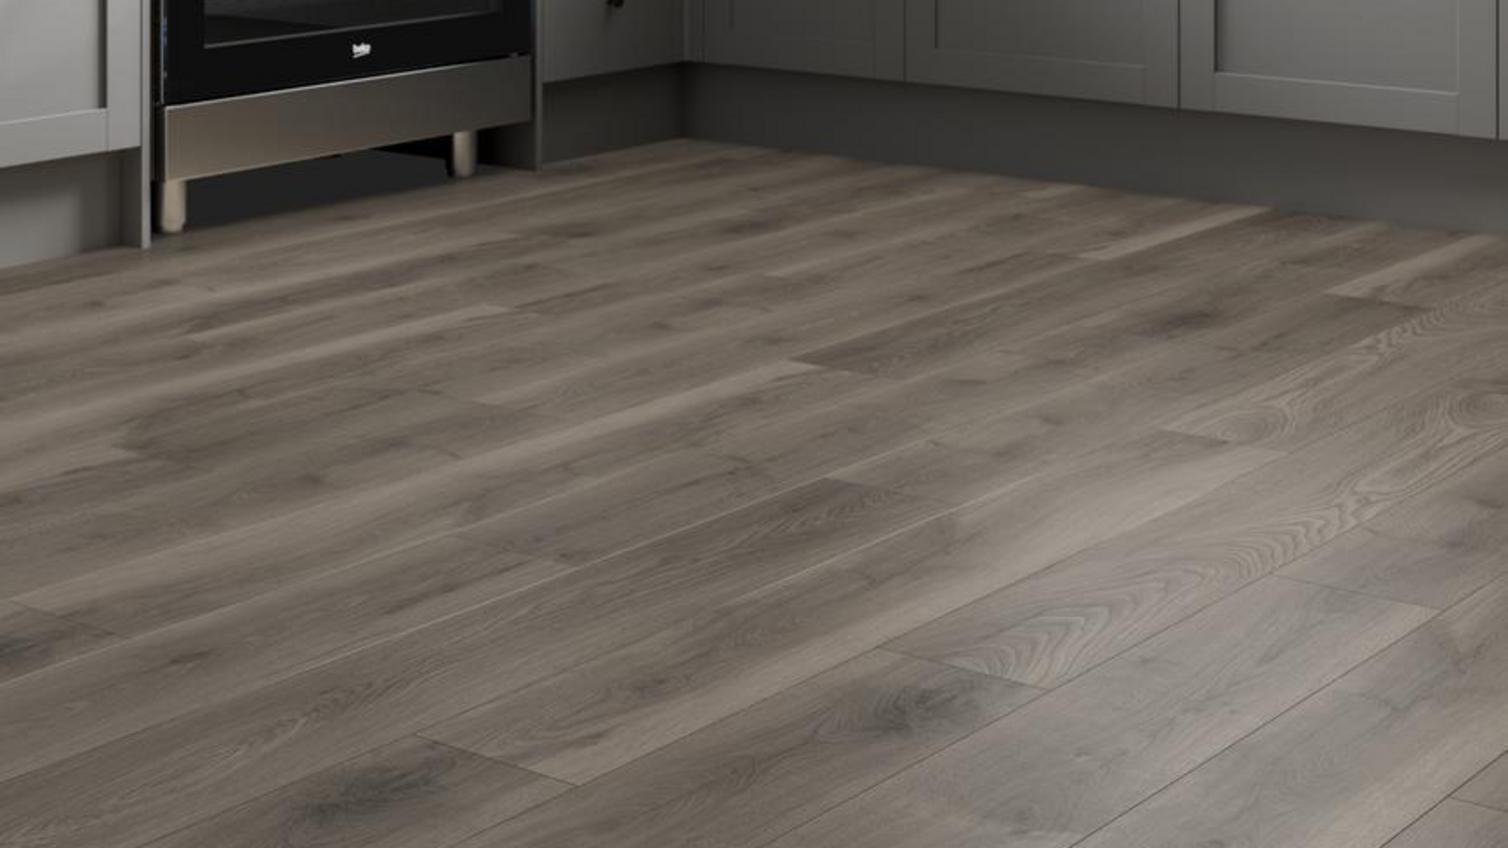 A utility room with dark brown, timber-effect laminate flooring